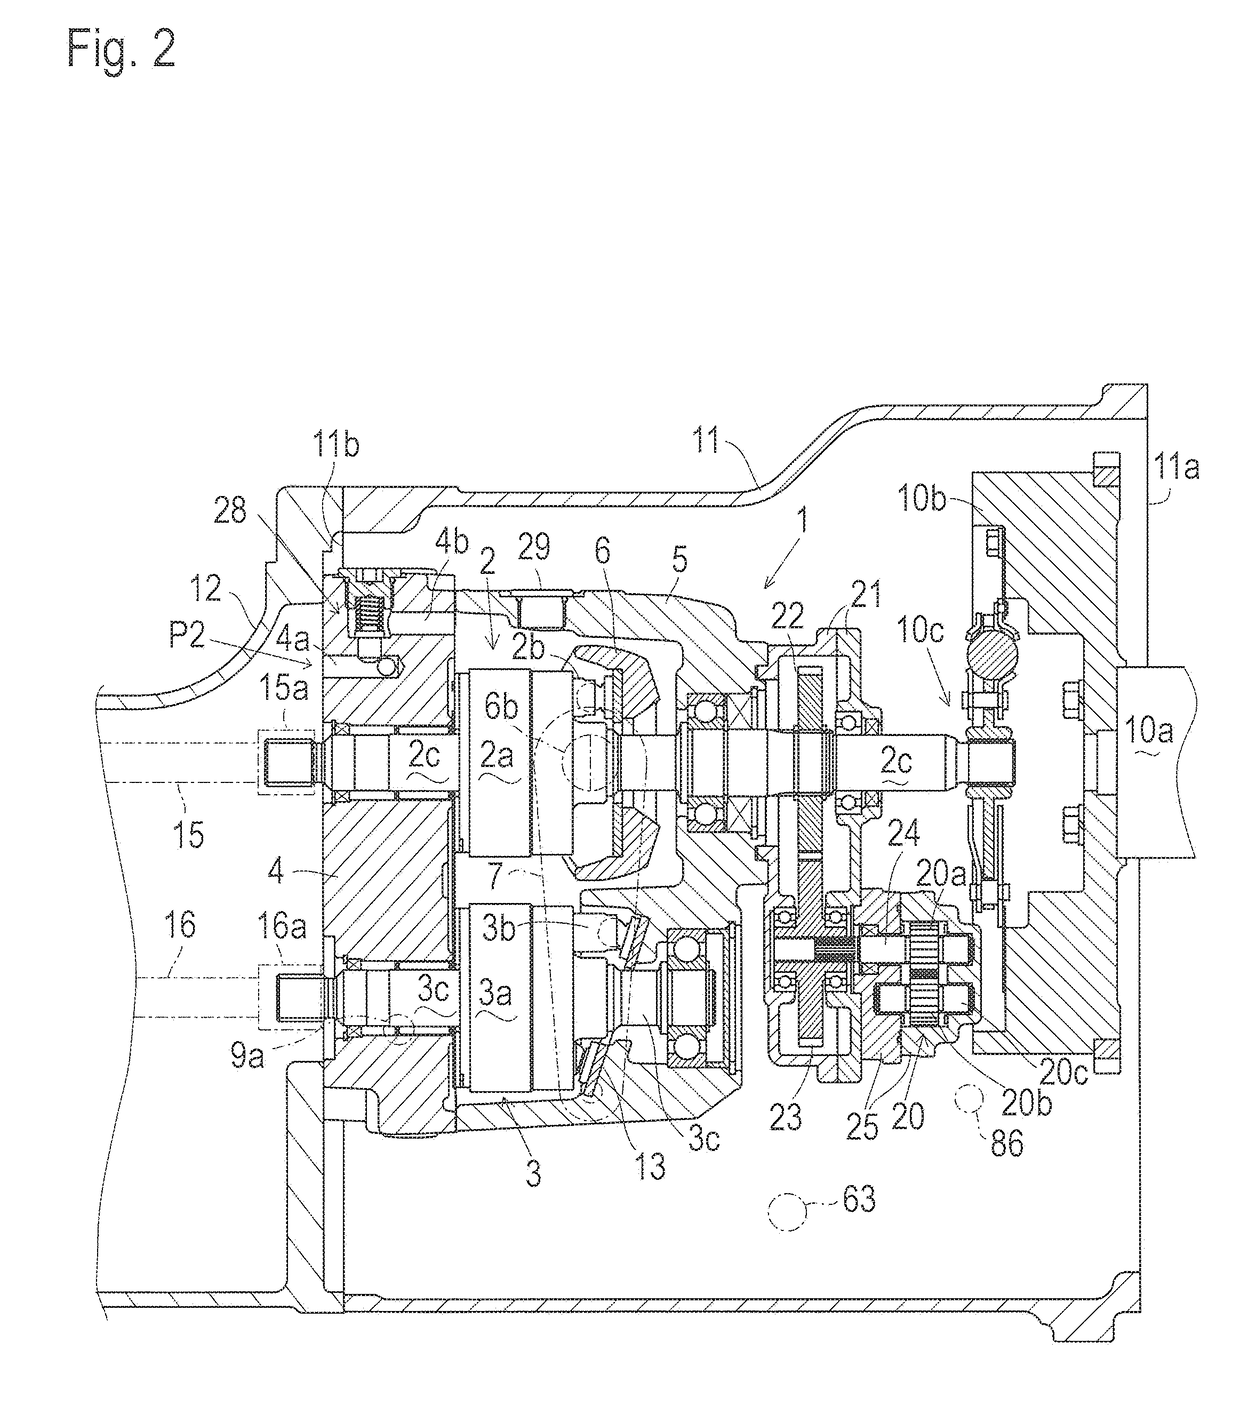 Actuator unit for controlling hydraulic pump